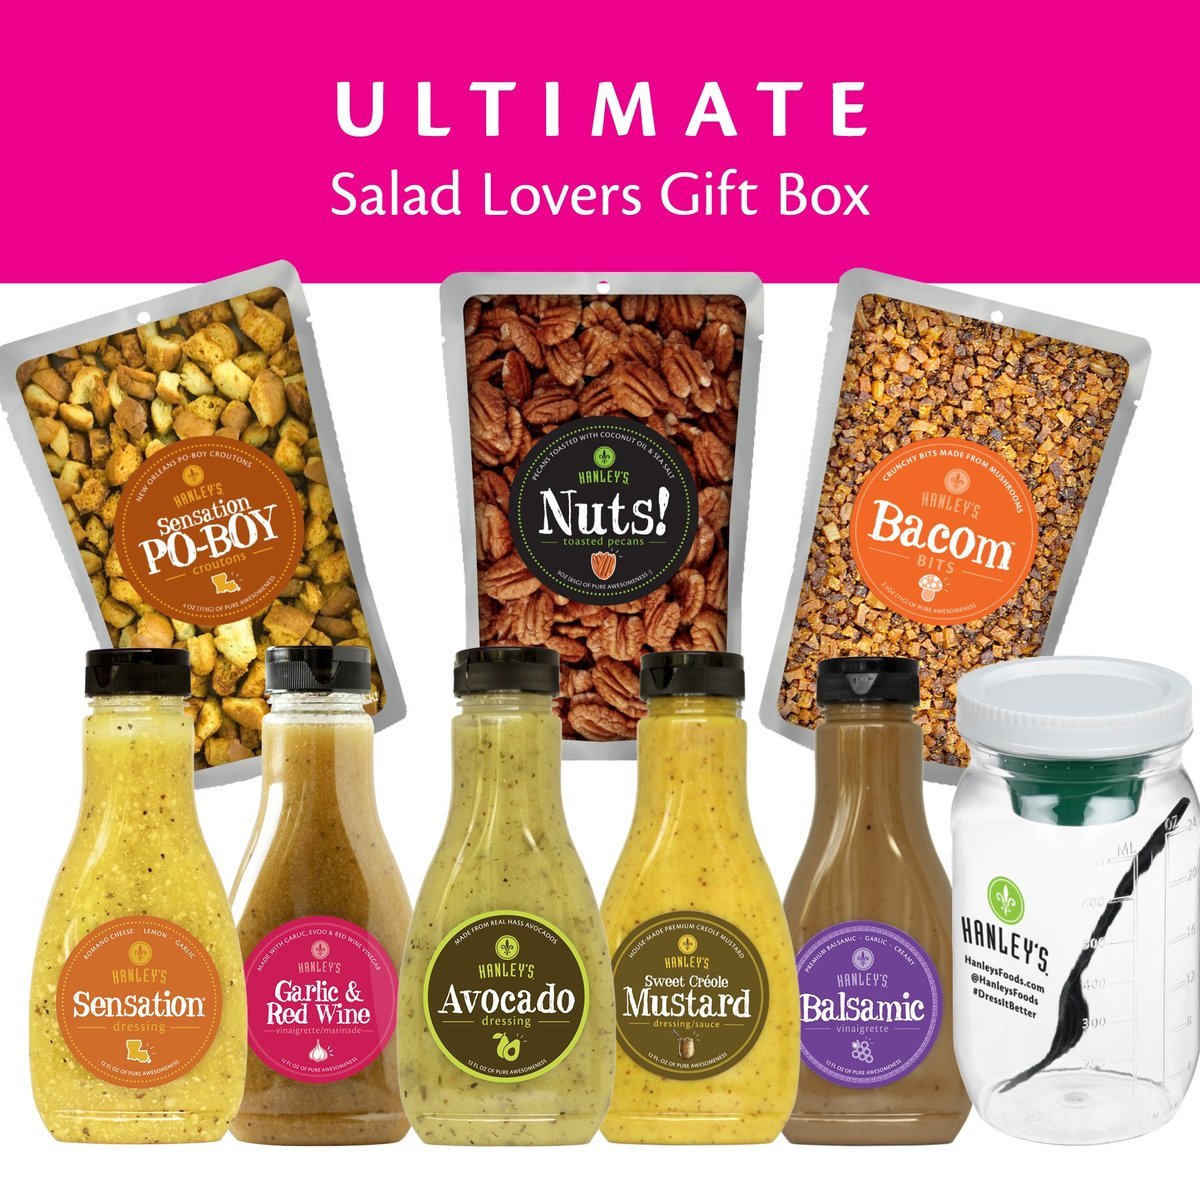 ULTIMATE Salad-Lovers Gift Box